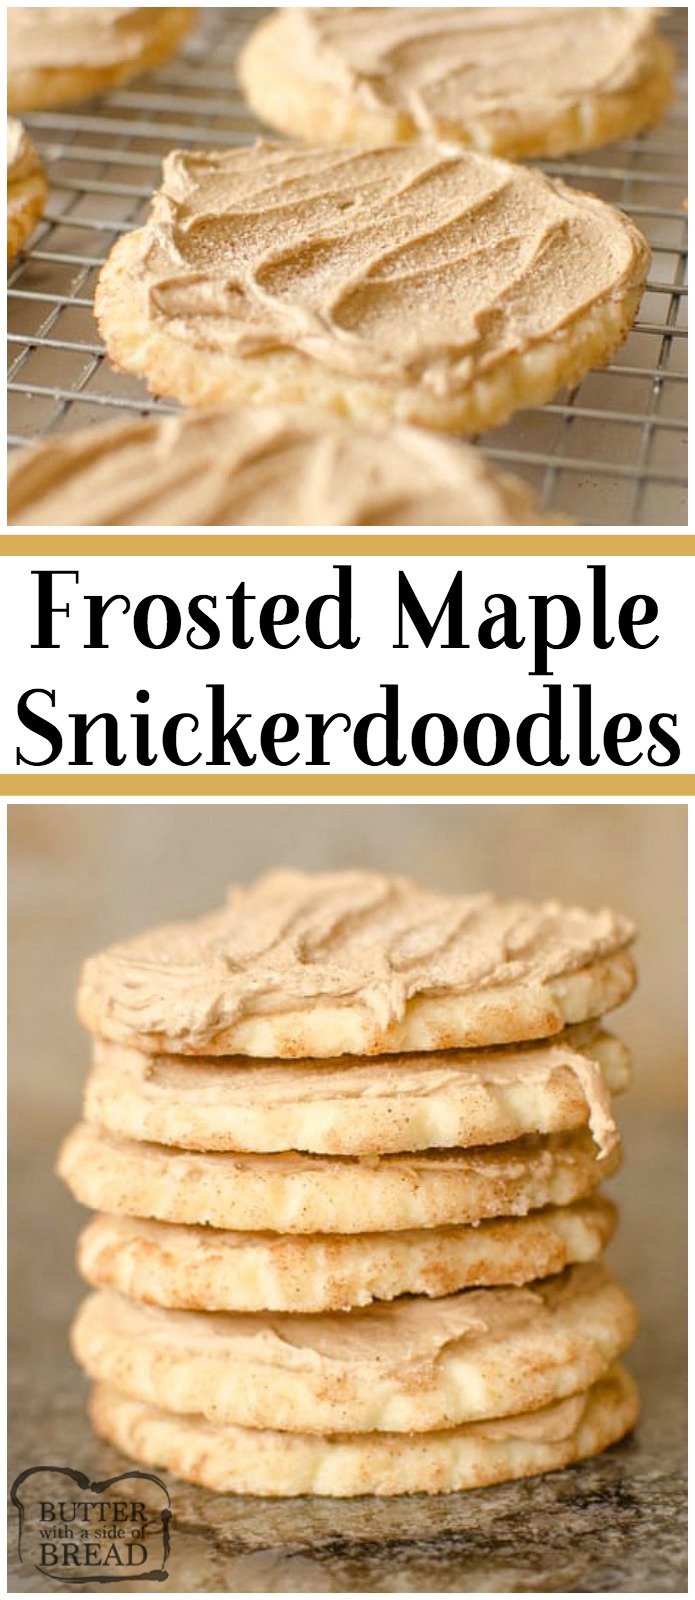 Frosted Maple Snickerdoodles are a soft, chewy cookie rolled in cinnamon and sugar topped with homemade Maple Frosting. This Maple Frosted Snickerdoodle recipe is a perfect fall dessert! #maple #snickerdoodle #recipe #cookies #snickerdoodles #cookie #Fall #baking #cinnamon from BUTTER WITH A SIDE OF BREAD